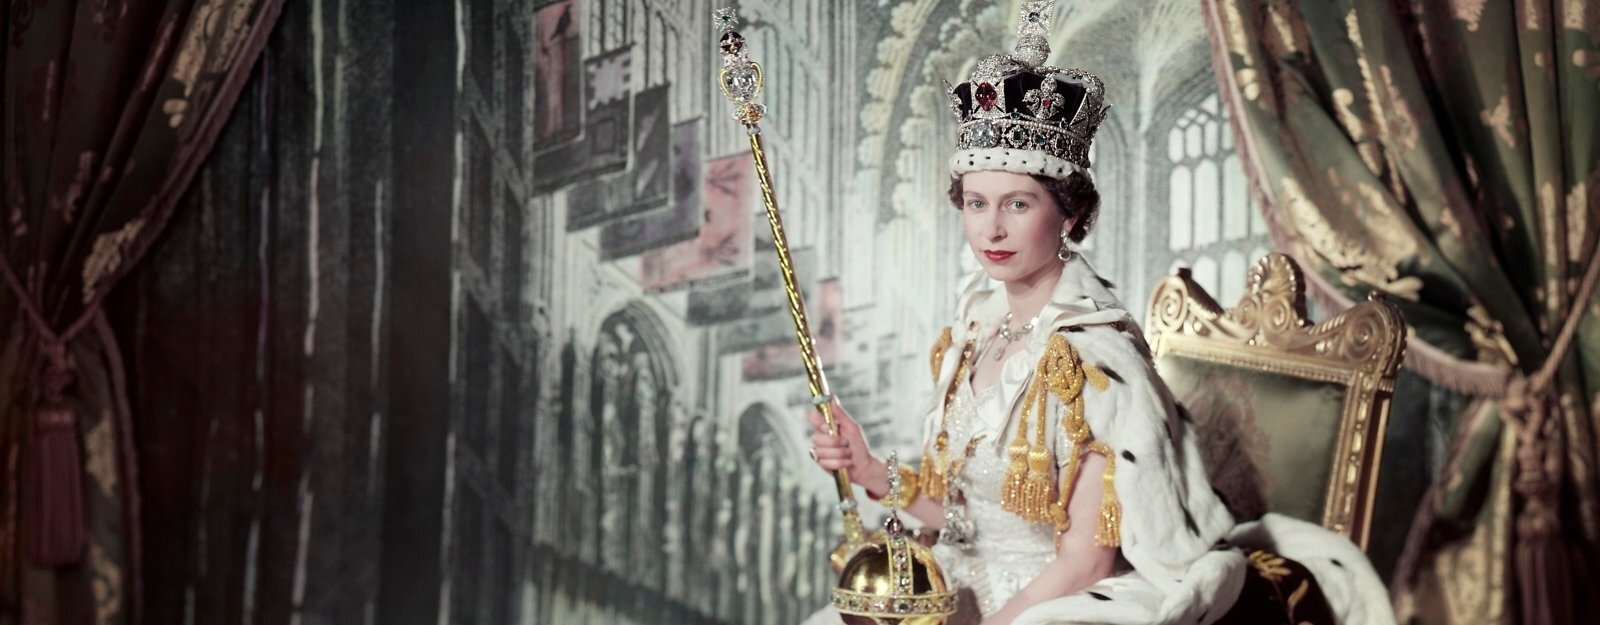 Long Has She Reigned Over Us: The Death of Queen Elizabeth II and the Dignity of Duty